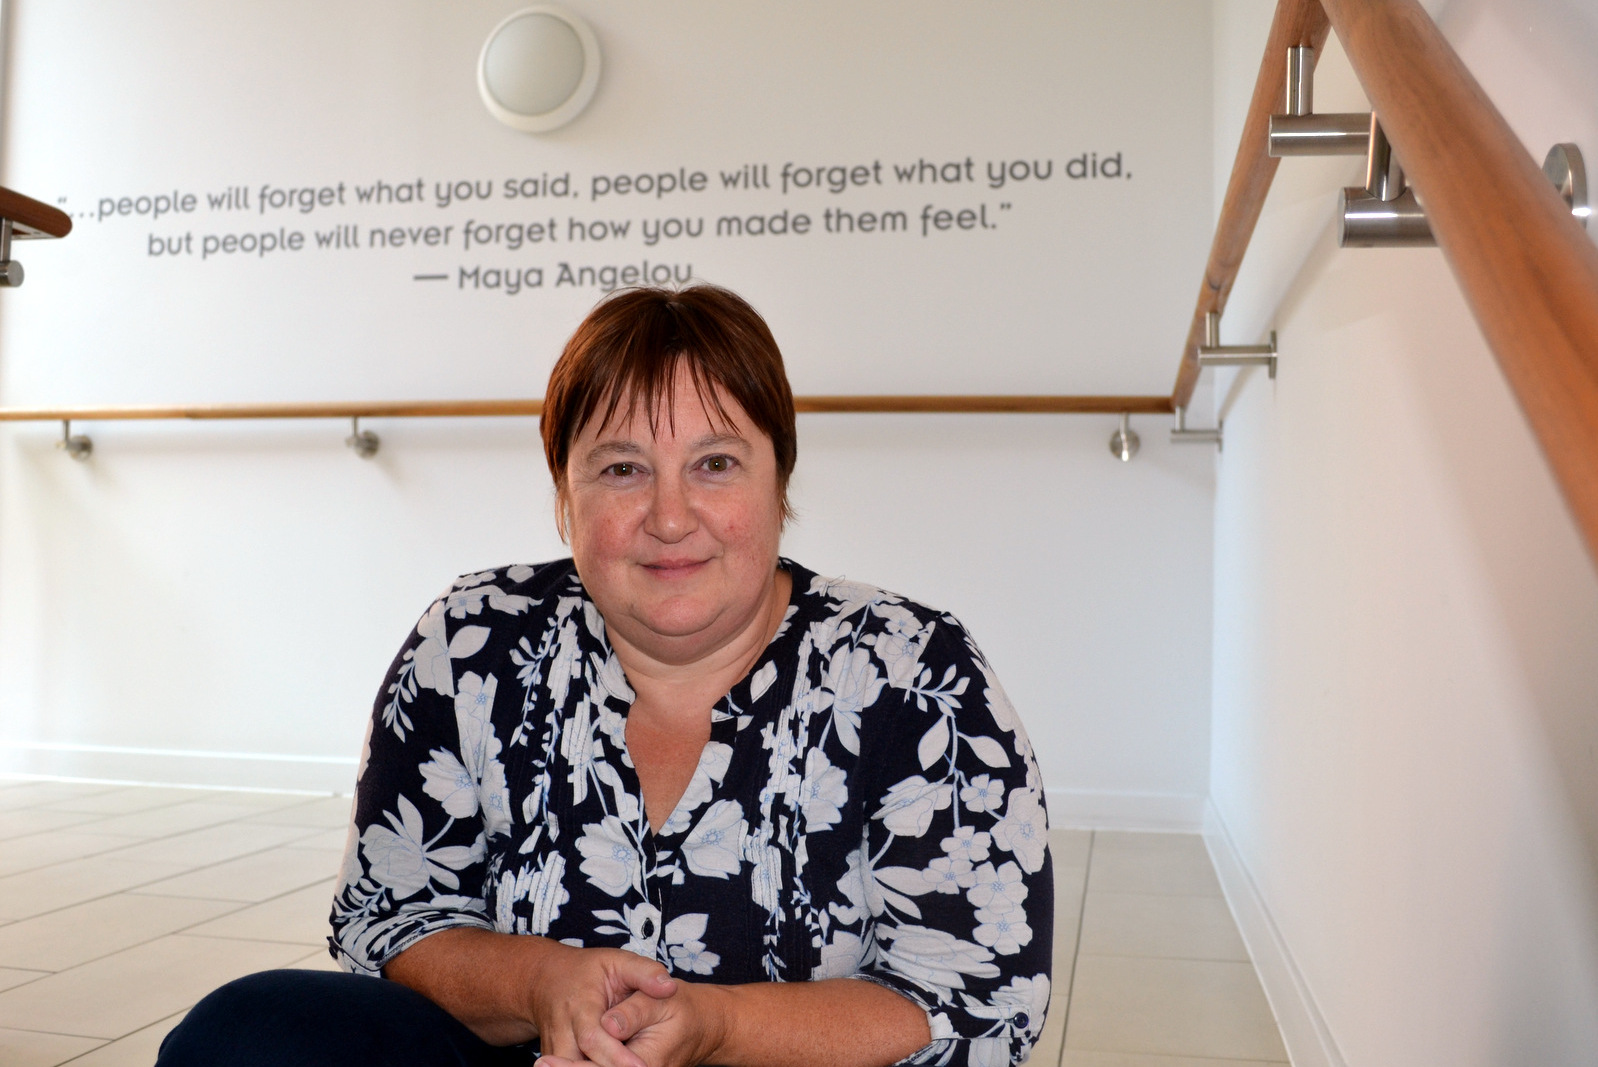 Worthing 'Mumpreneur' who battled cancer is proud to support women in business